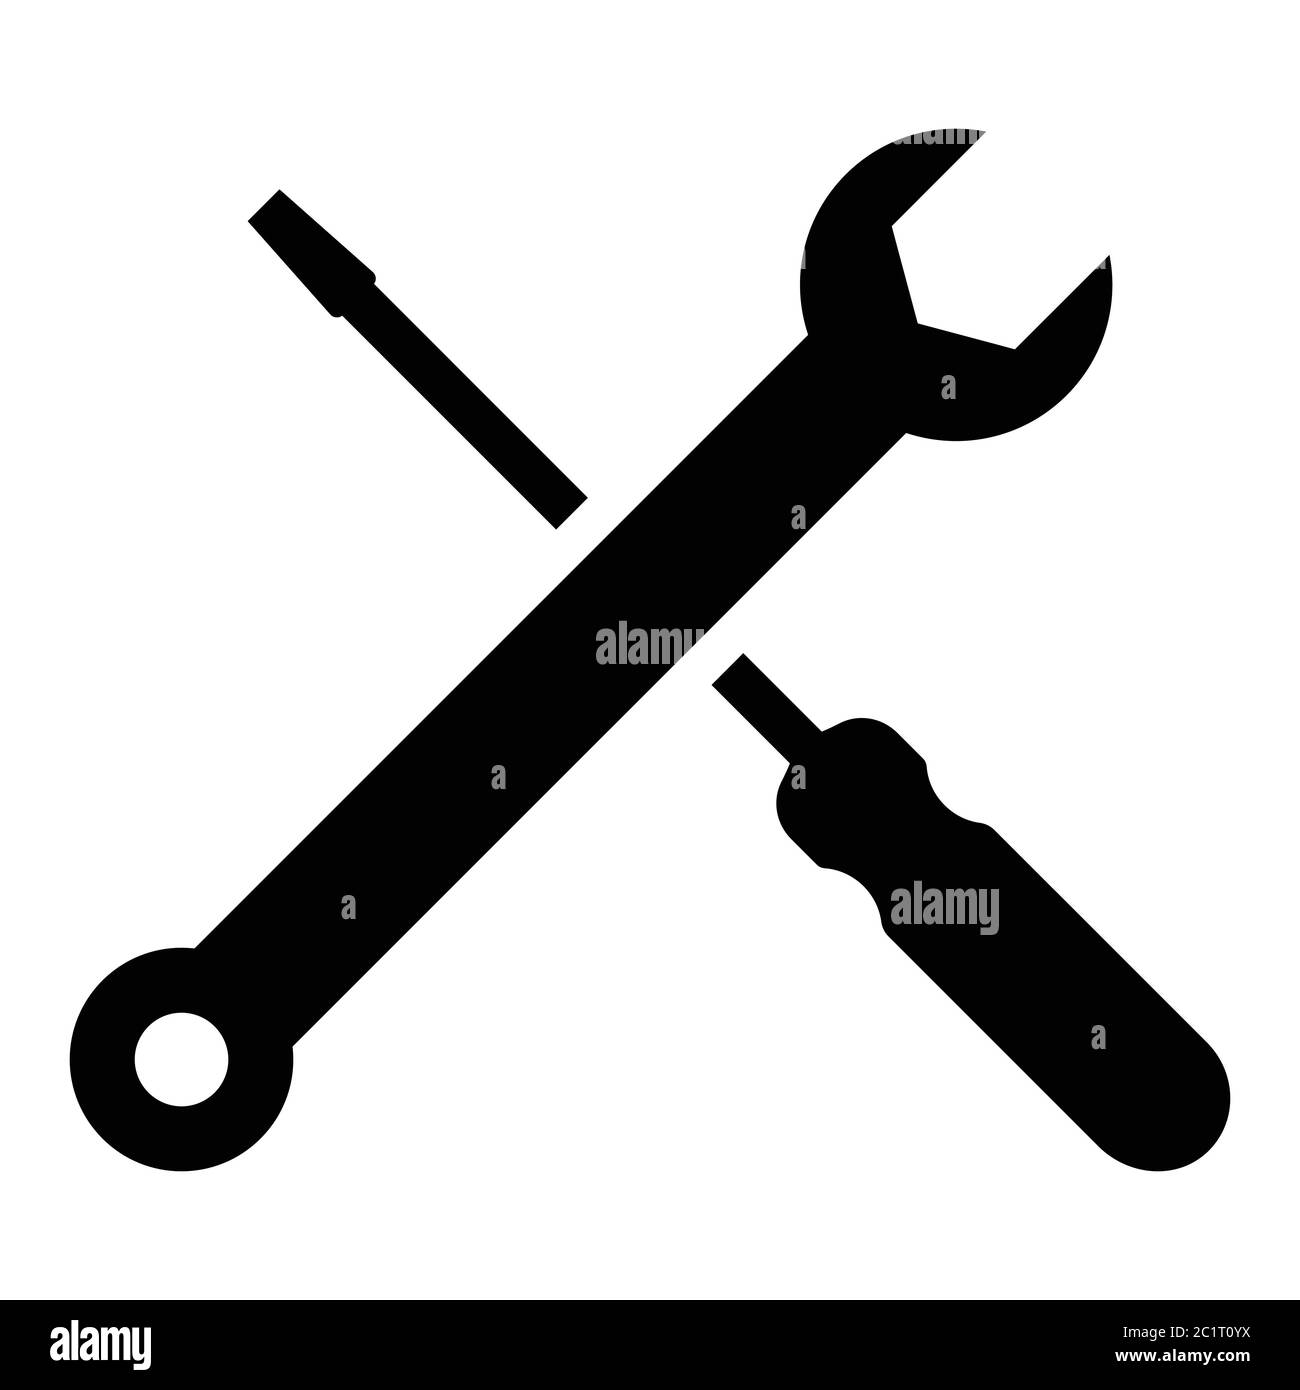 Wrench and Screwdriver Cross. Repair Maintenance Work Tools. Black Illustration Isolated on a White Background. EPS Vector Stock Vector